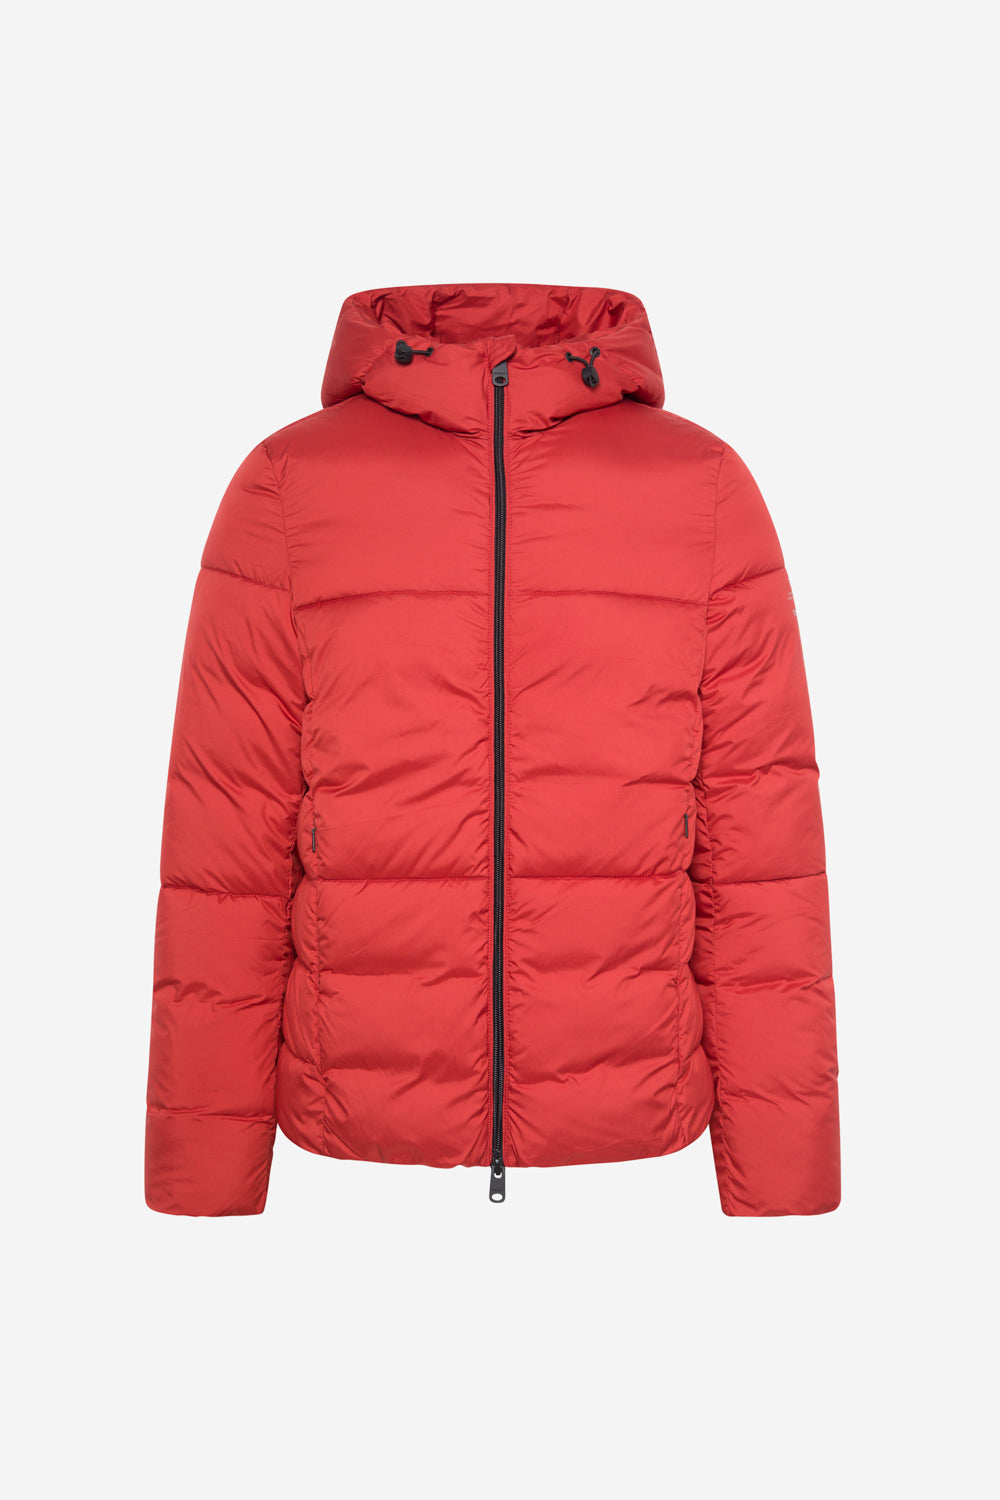 CHILLY RED HOXA JACKET